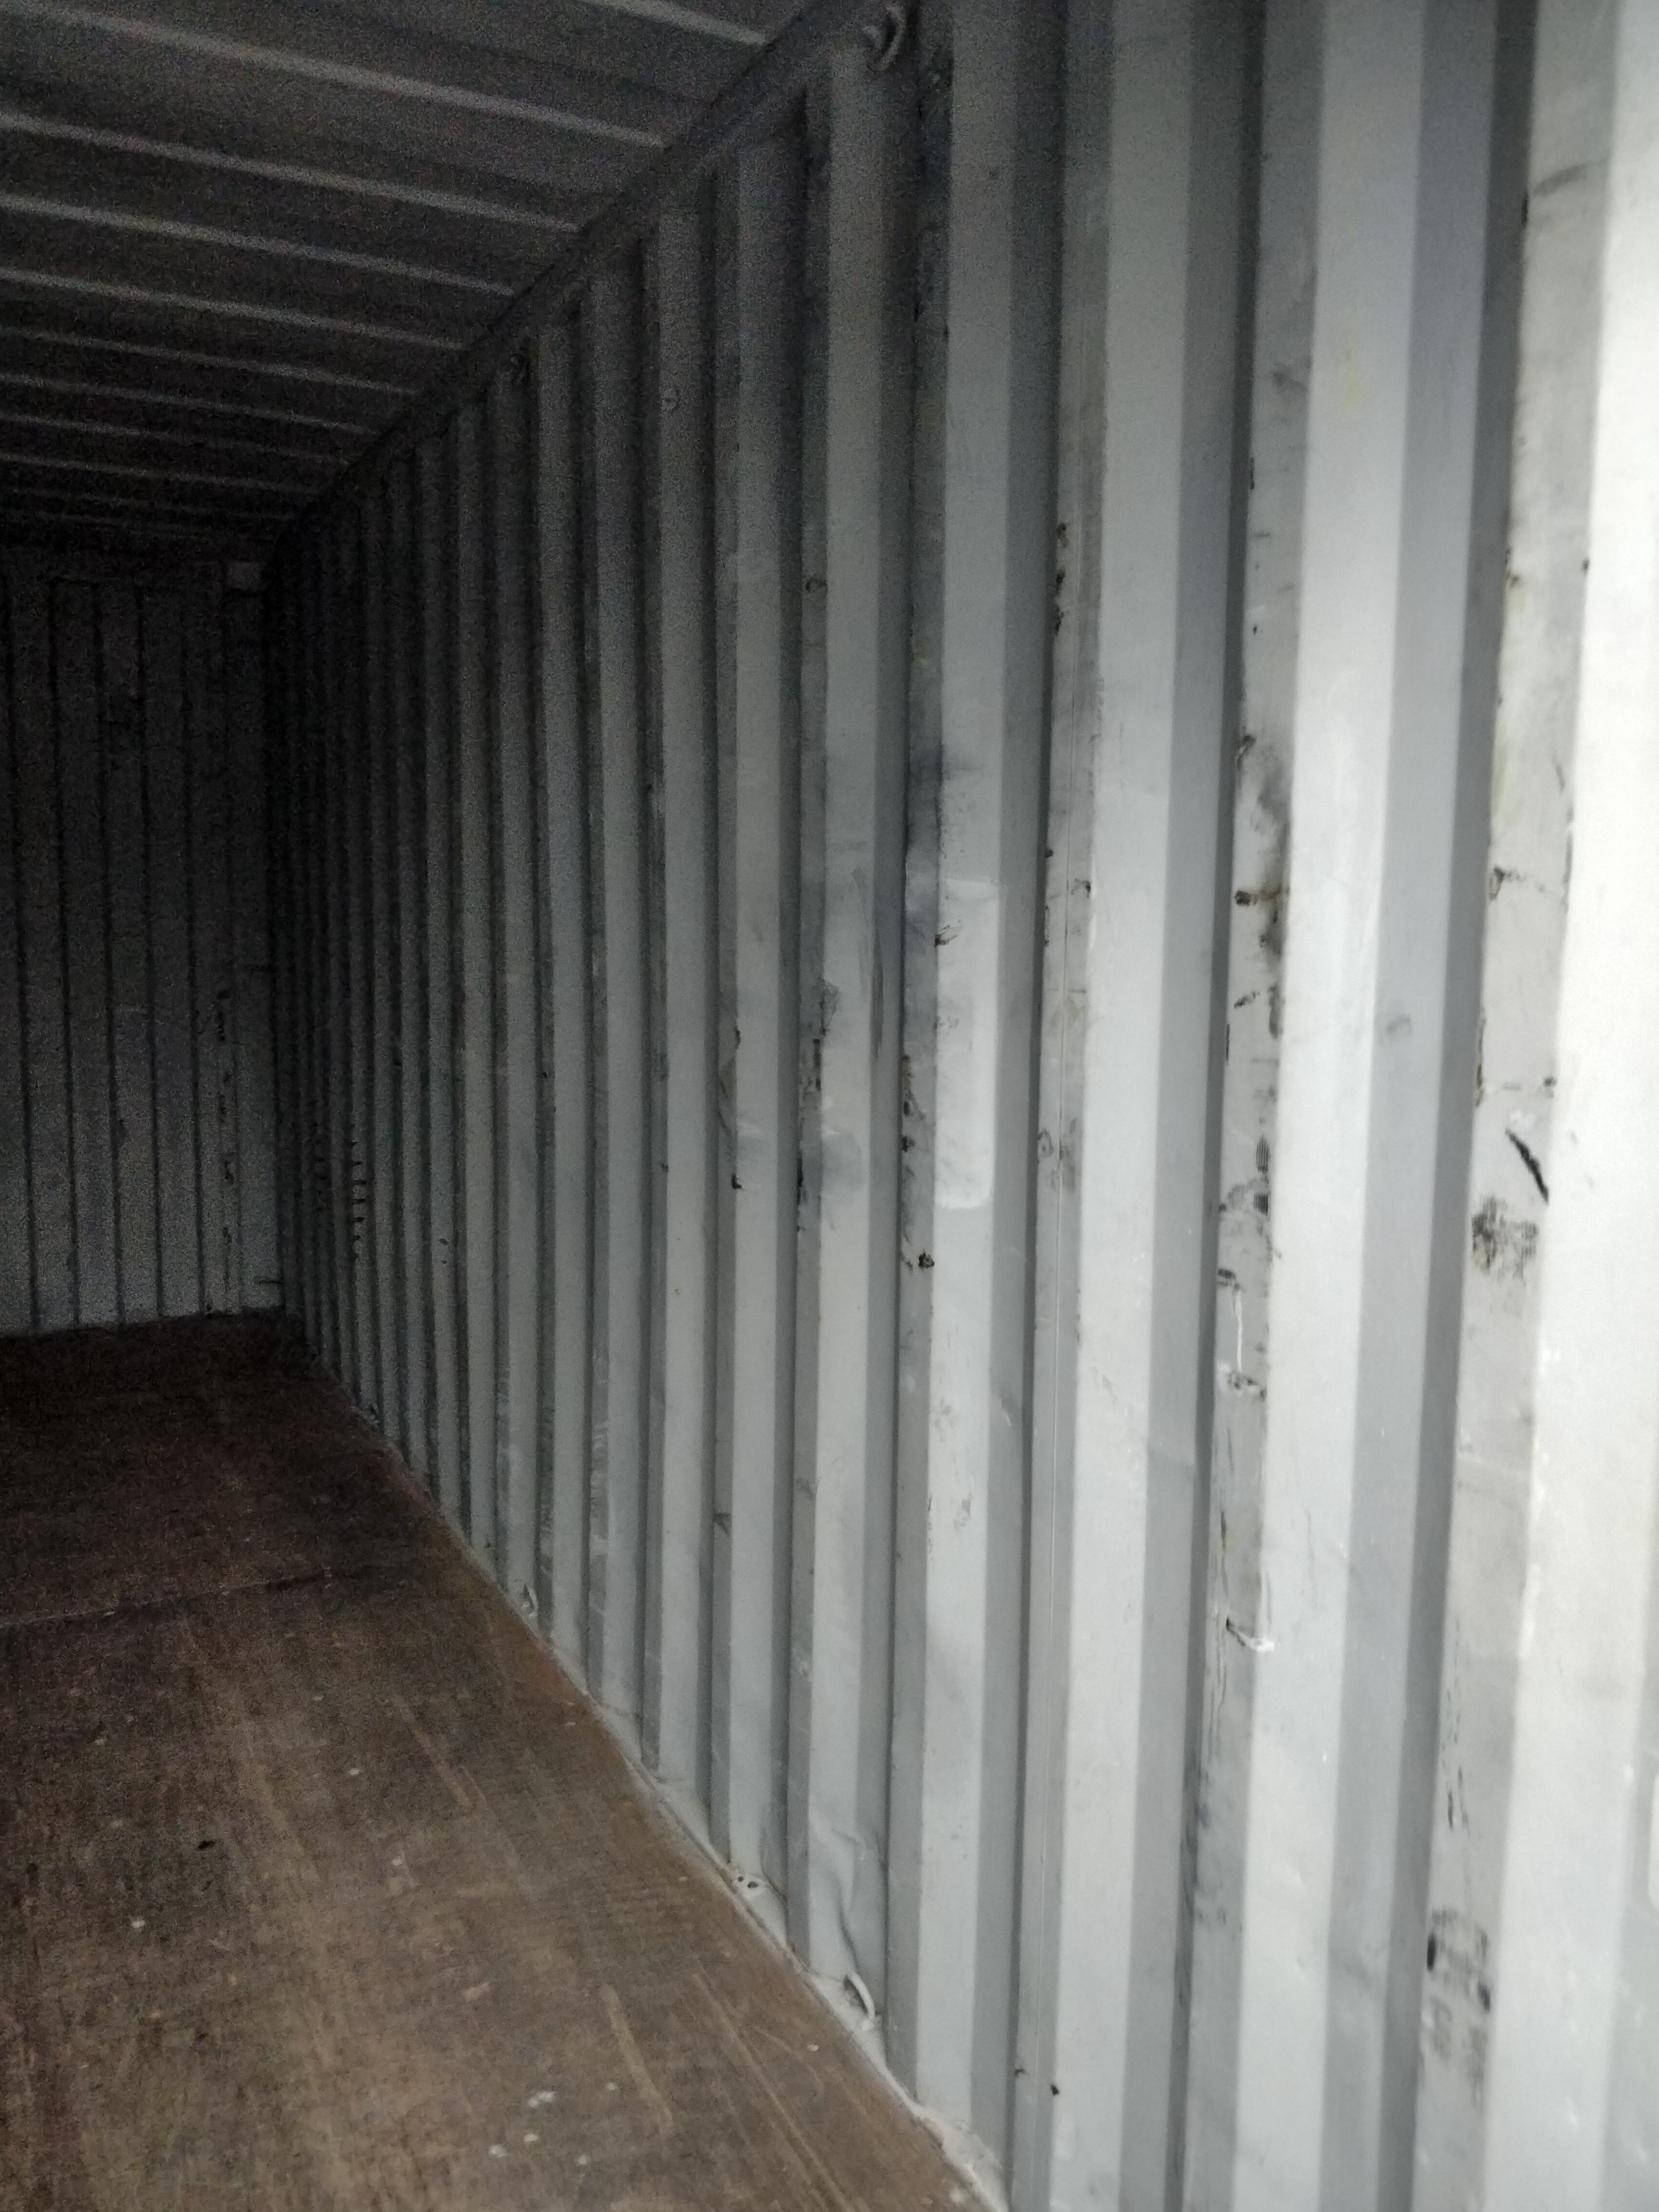 20DC Shipping containers 20 feet